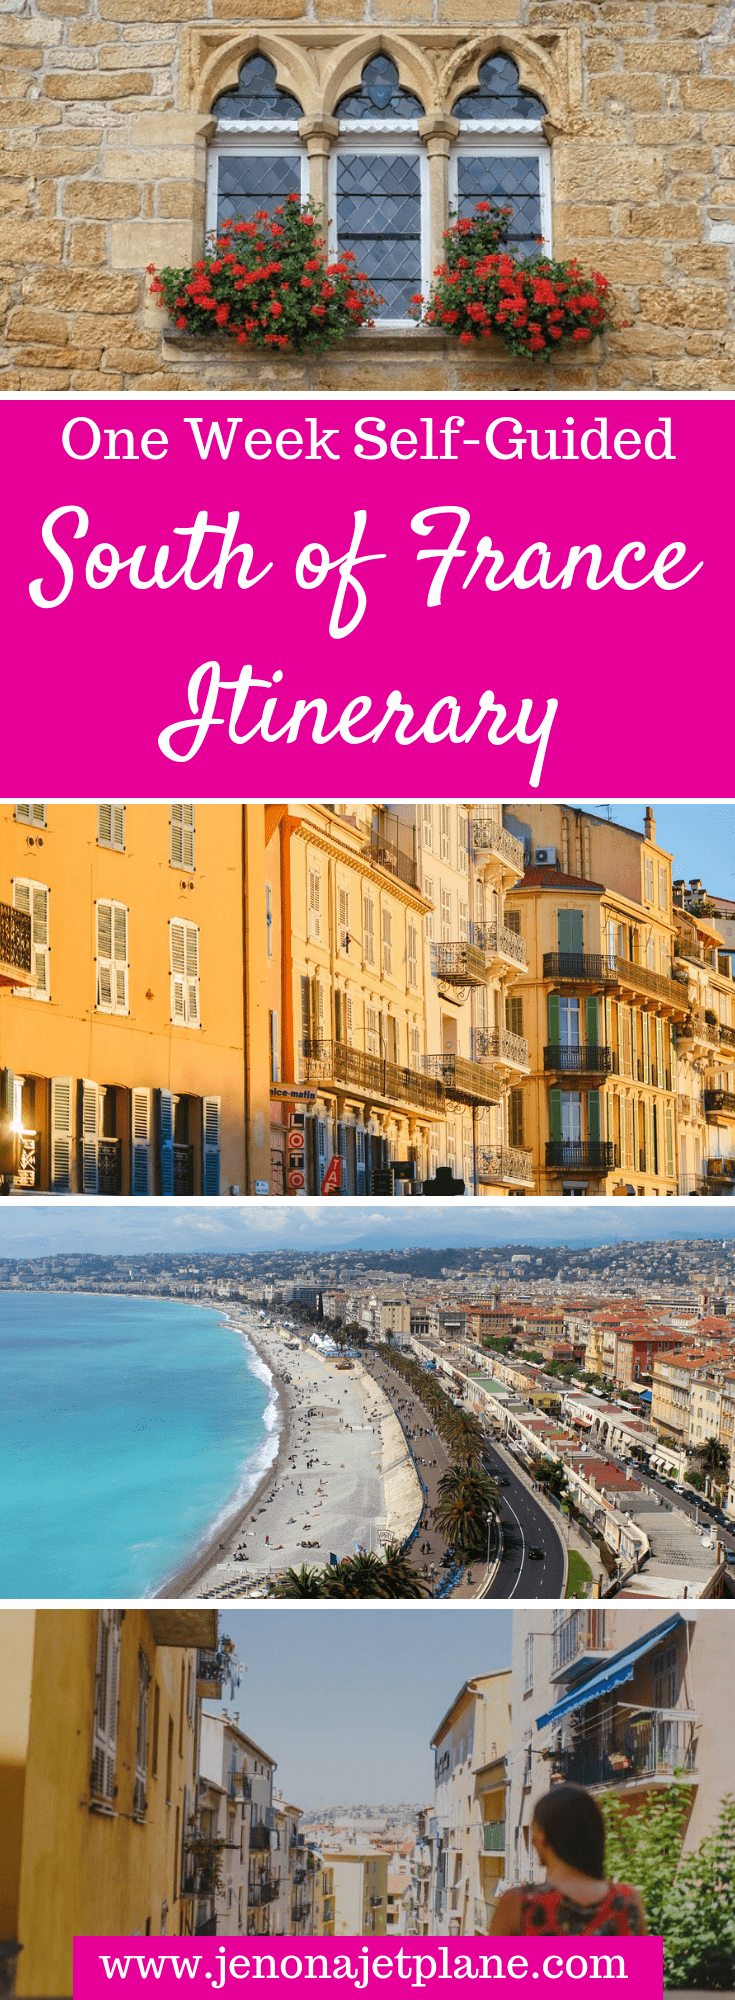 Looking for the perfect South of France itinerary? From lavender fields to the Van Gogh trail, here's everything you can't miss on a South of France road trip. Save to your travel board for future reference. #southoffrance #southoffrancetravel #southoffranceroadtrip #europetravel #francetravel #roadtripideas #europetrip #franceitinerary #franceitineraryoneweek